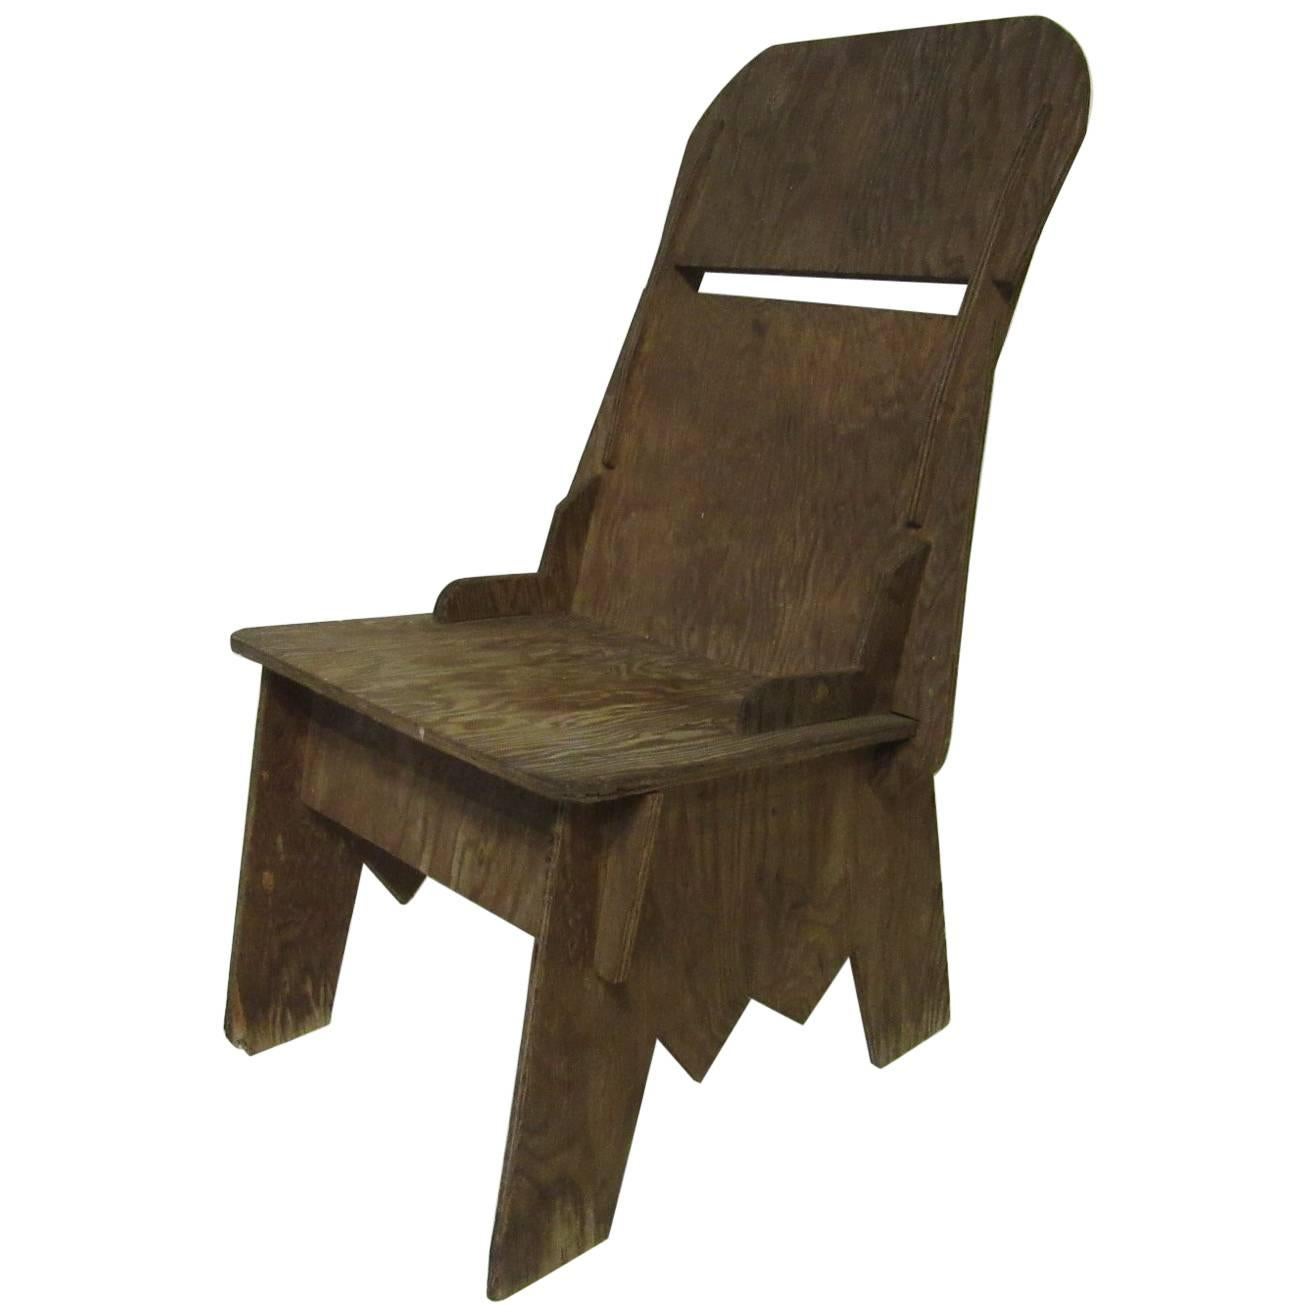 Early Midcentury Interlocking Plywood Chair in the style of Frank Lloyd Wright 